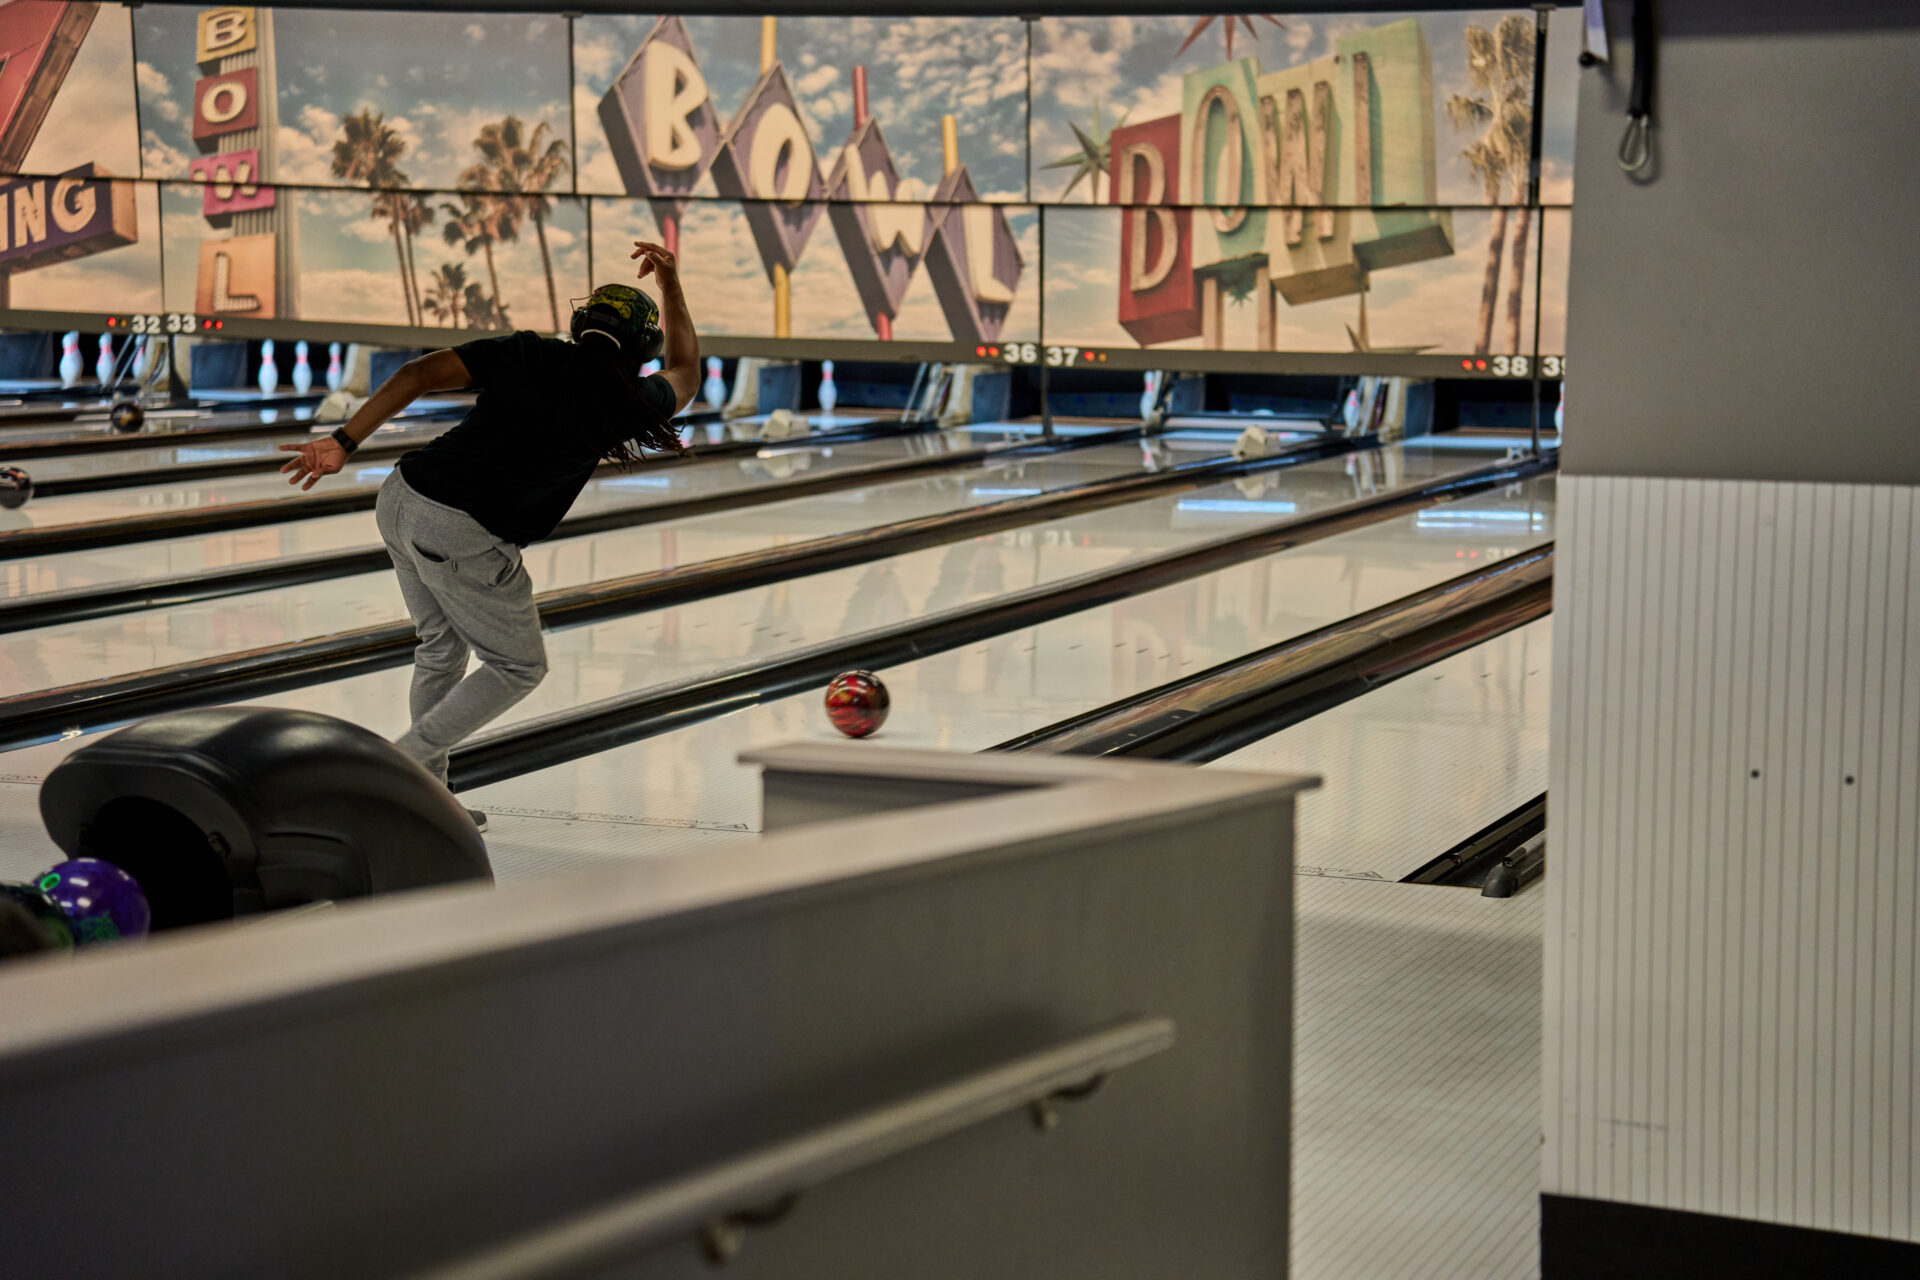 Let’s Strike a Deal: Book a Memorable Holiday Party at a Bowling Center